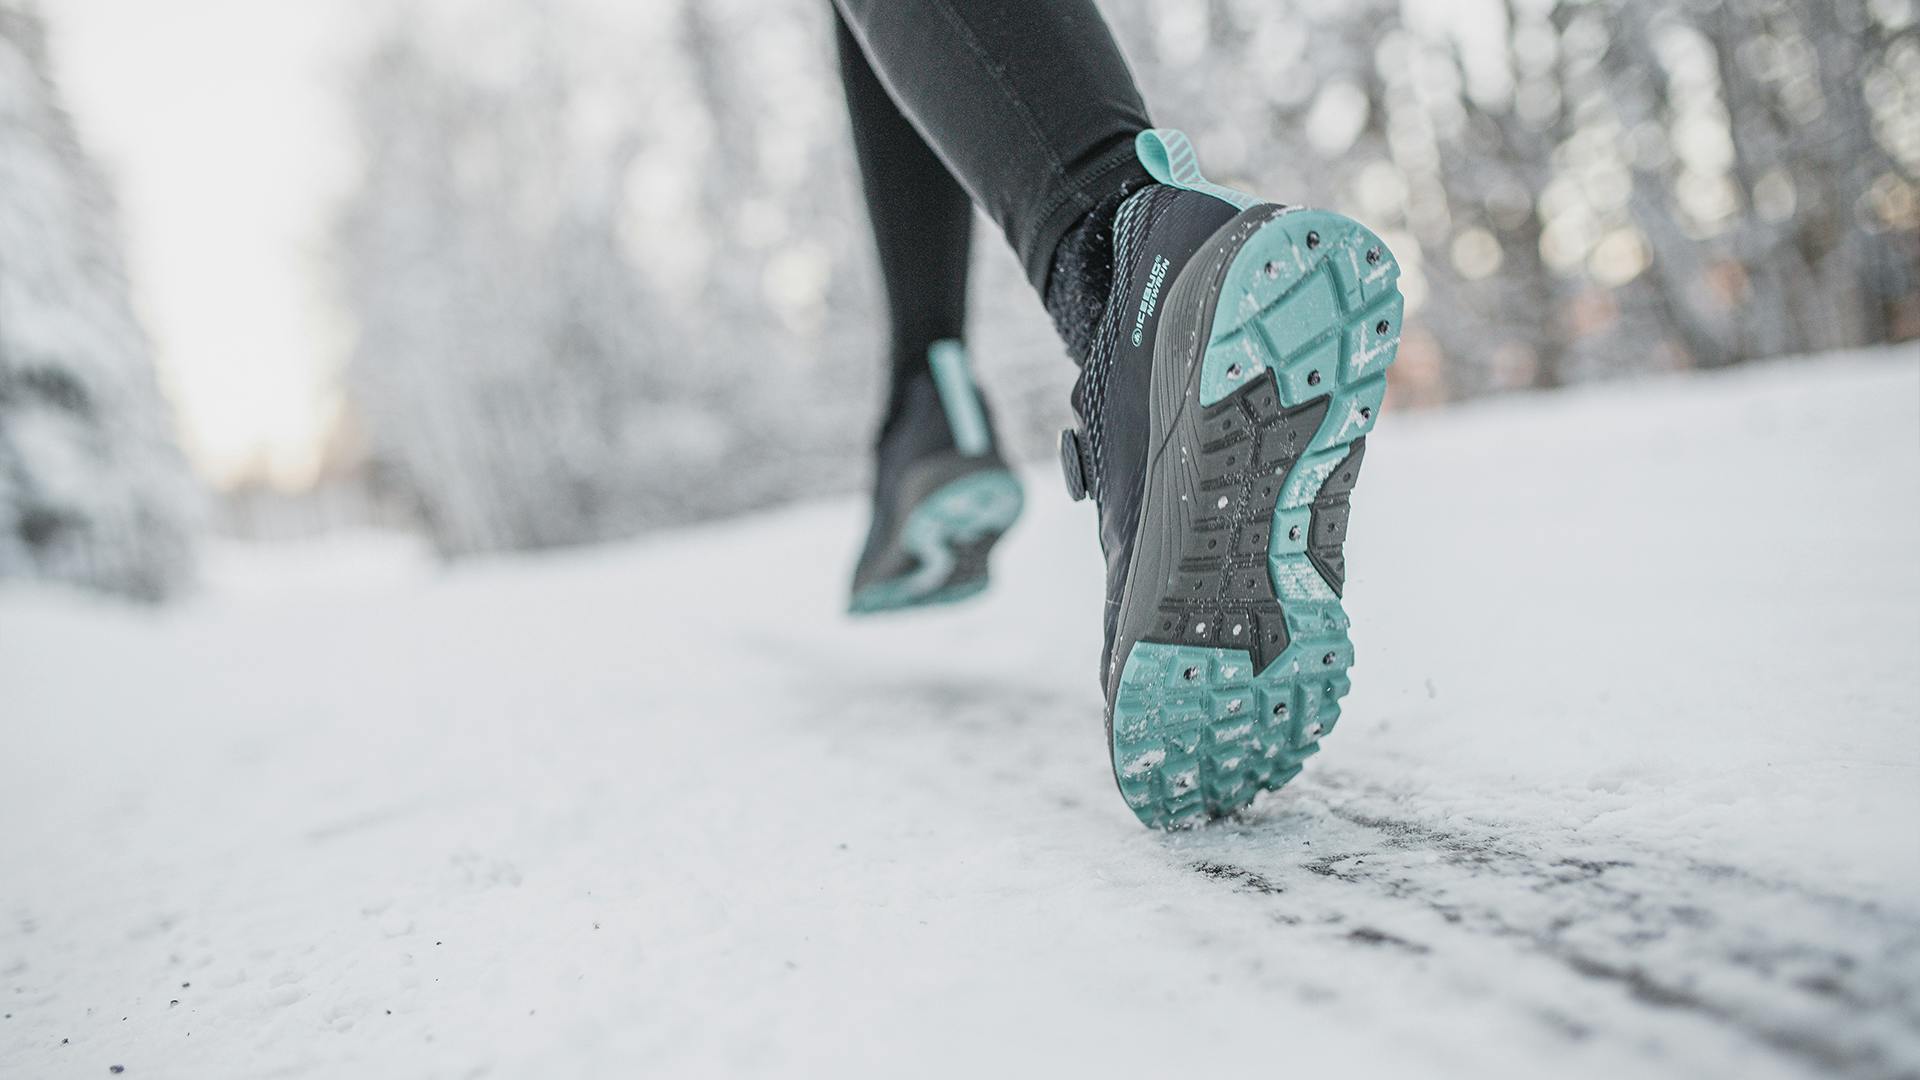 A person running on an icy road wearing winter running shoes from Icebug